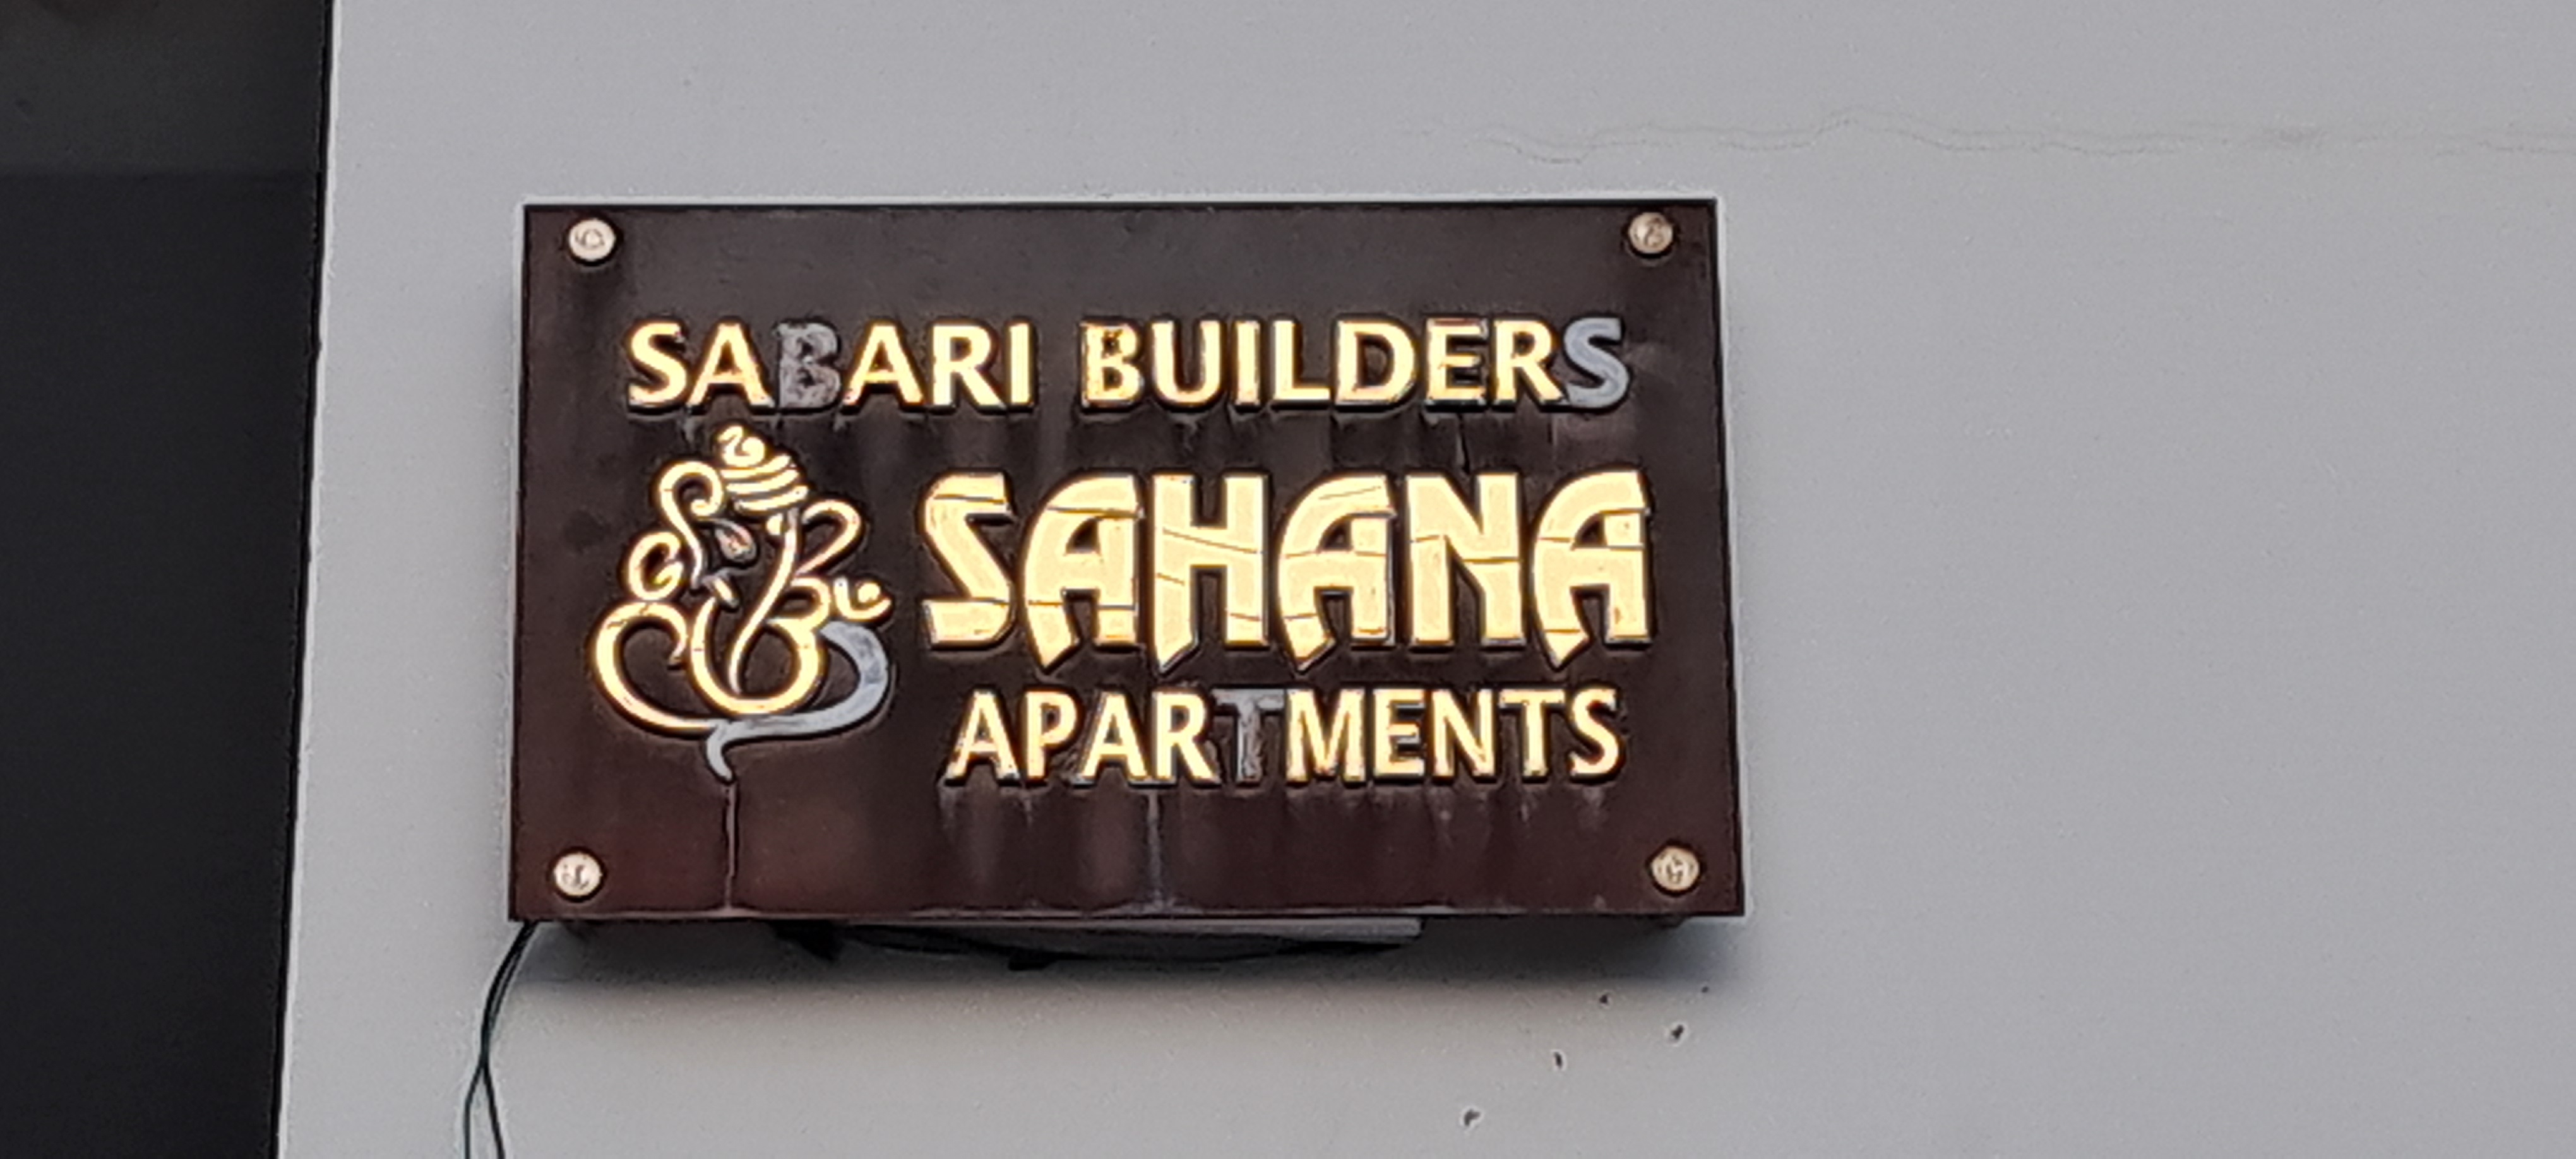 Flat for Resale in Sivananda Colony